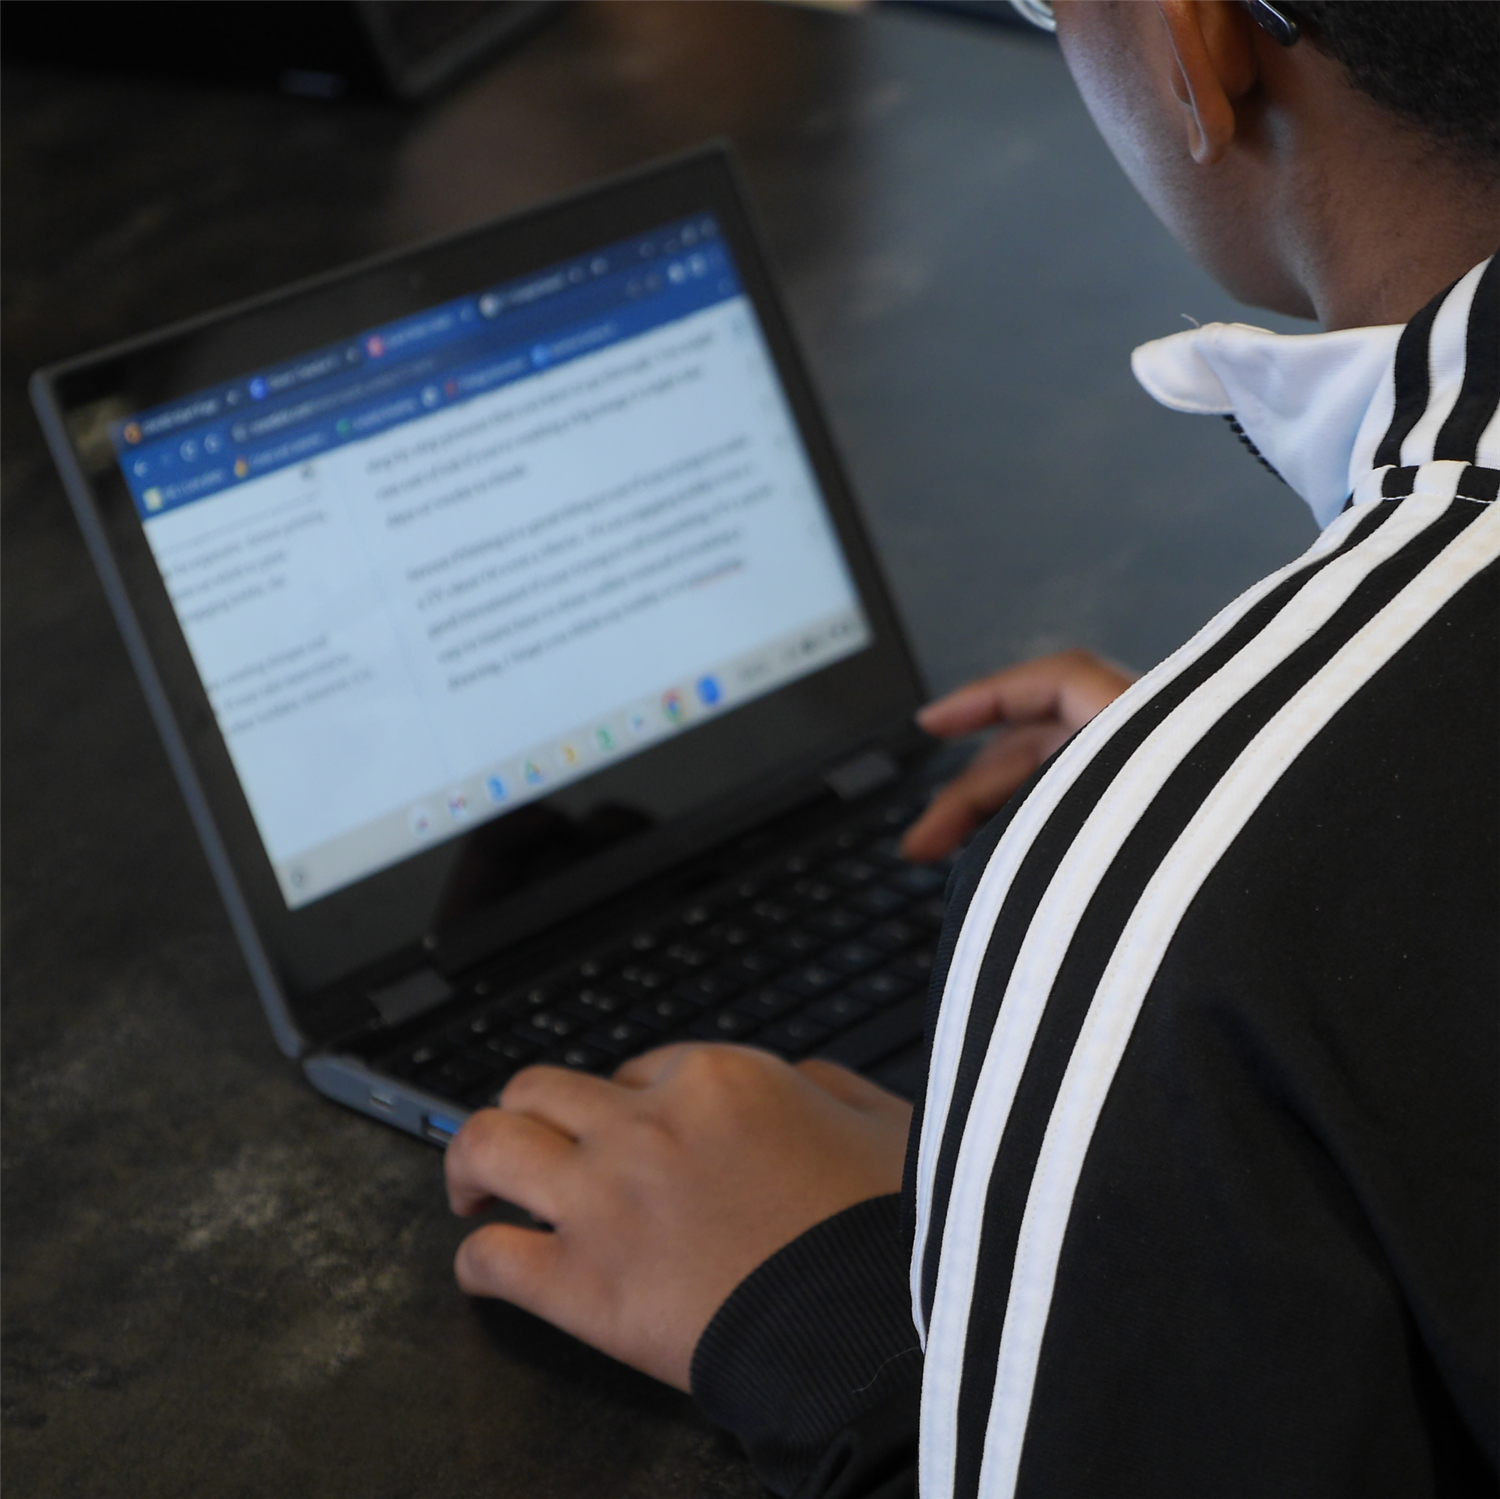  Student using a computer